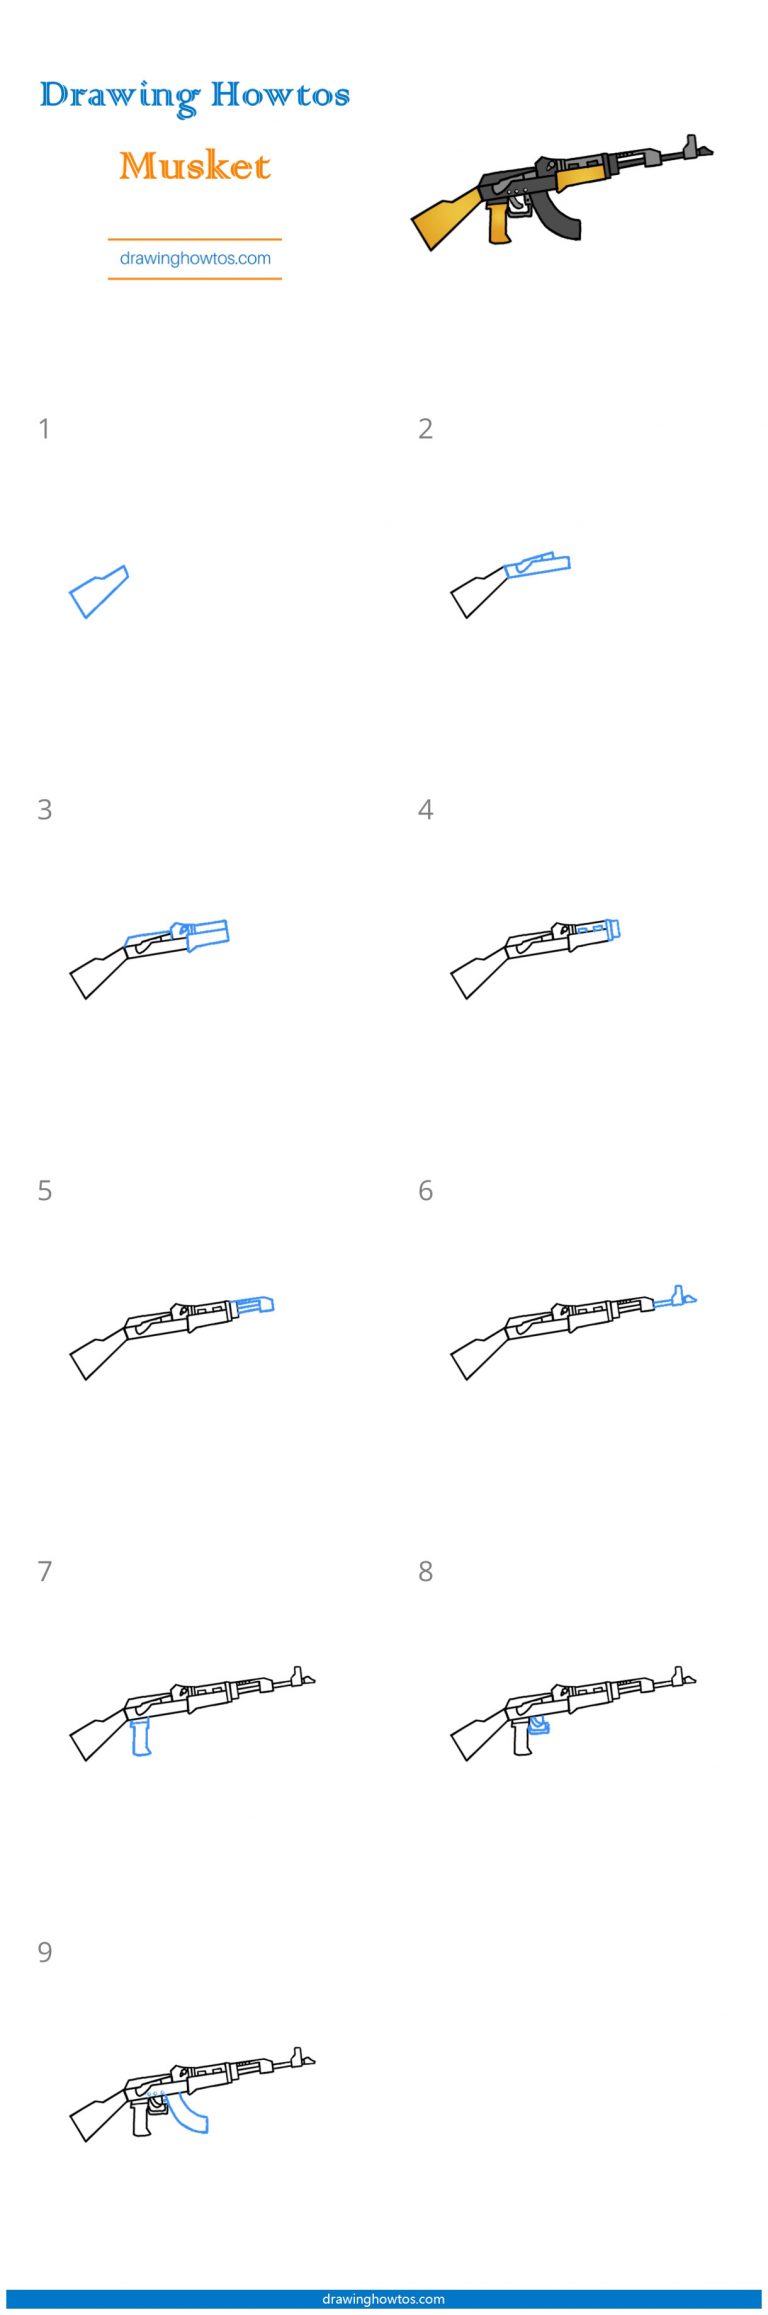 How to Draw a Musket Step by Step Easy Drawing Guides Drawing Howtos